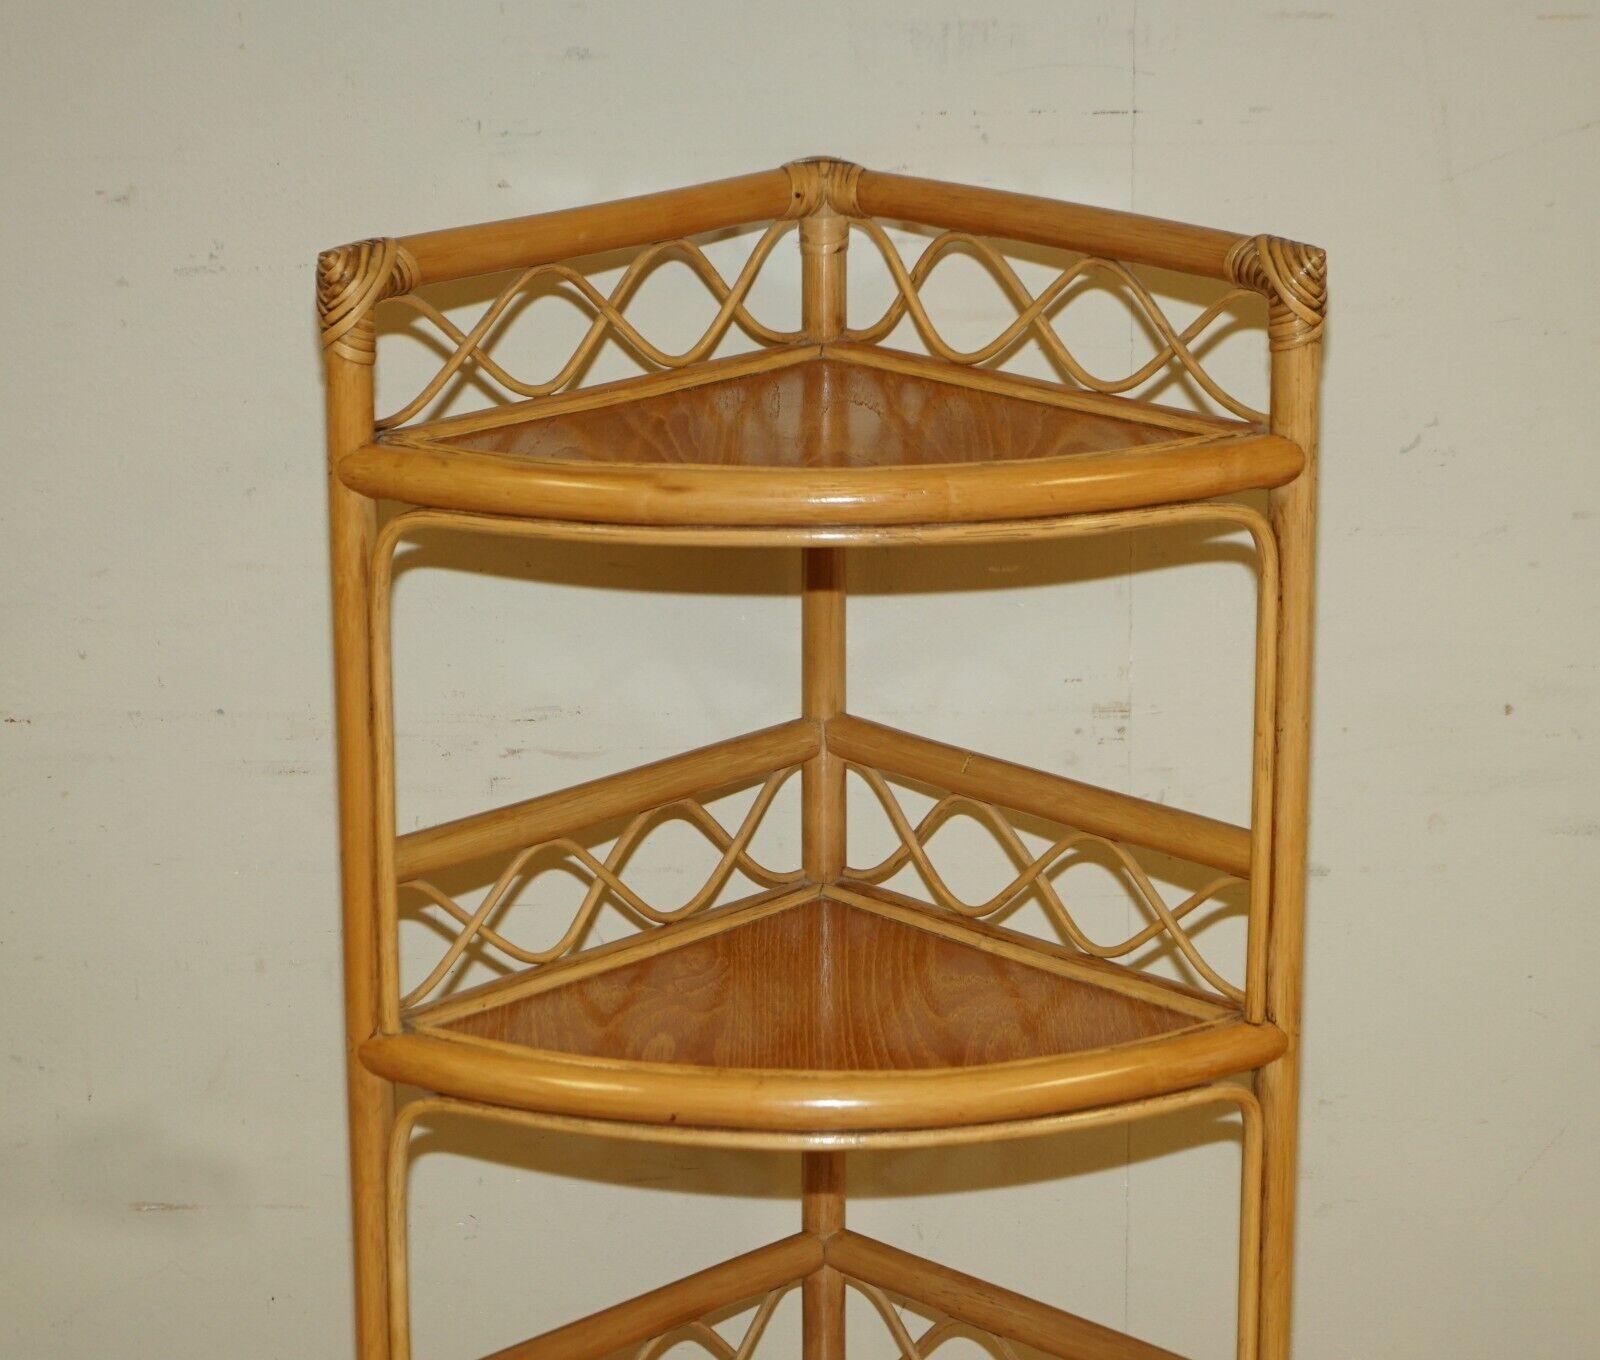 Anglais Vintage 4 Tiers Freestanding Corner Whatnot Shelves Bookcase Display Stand en vente